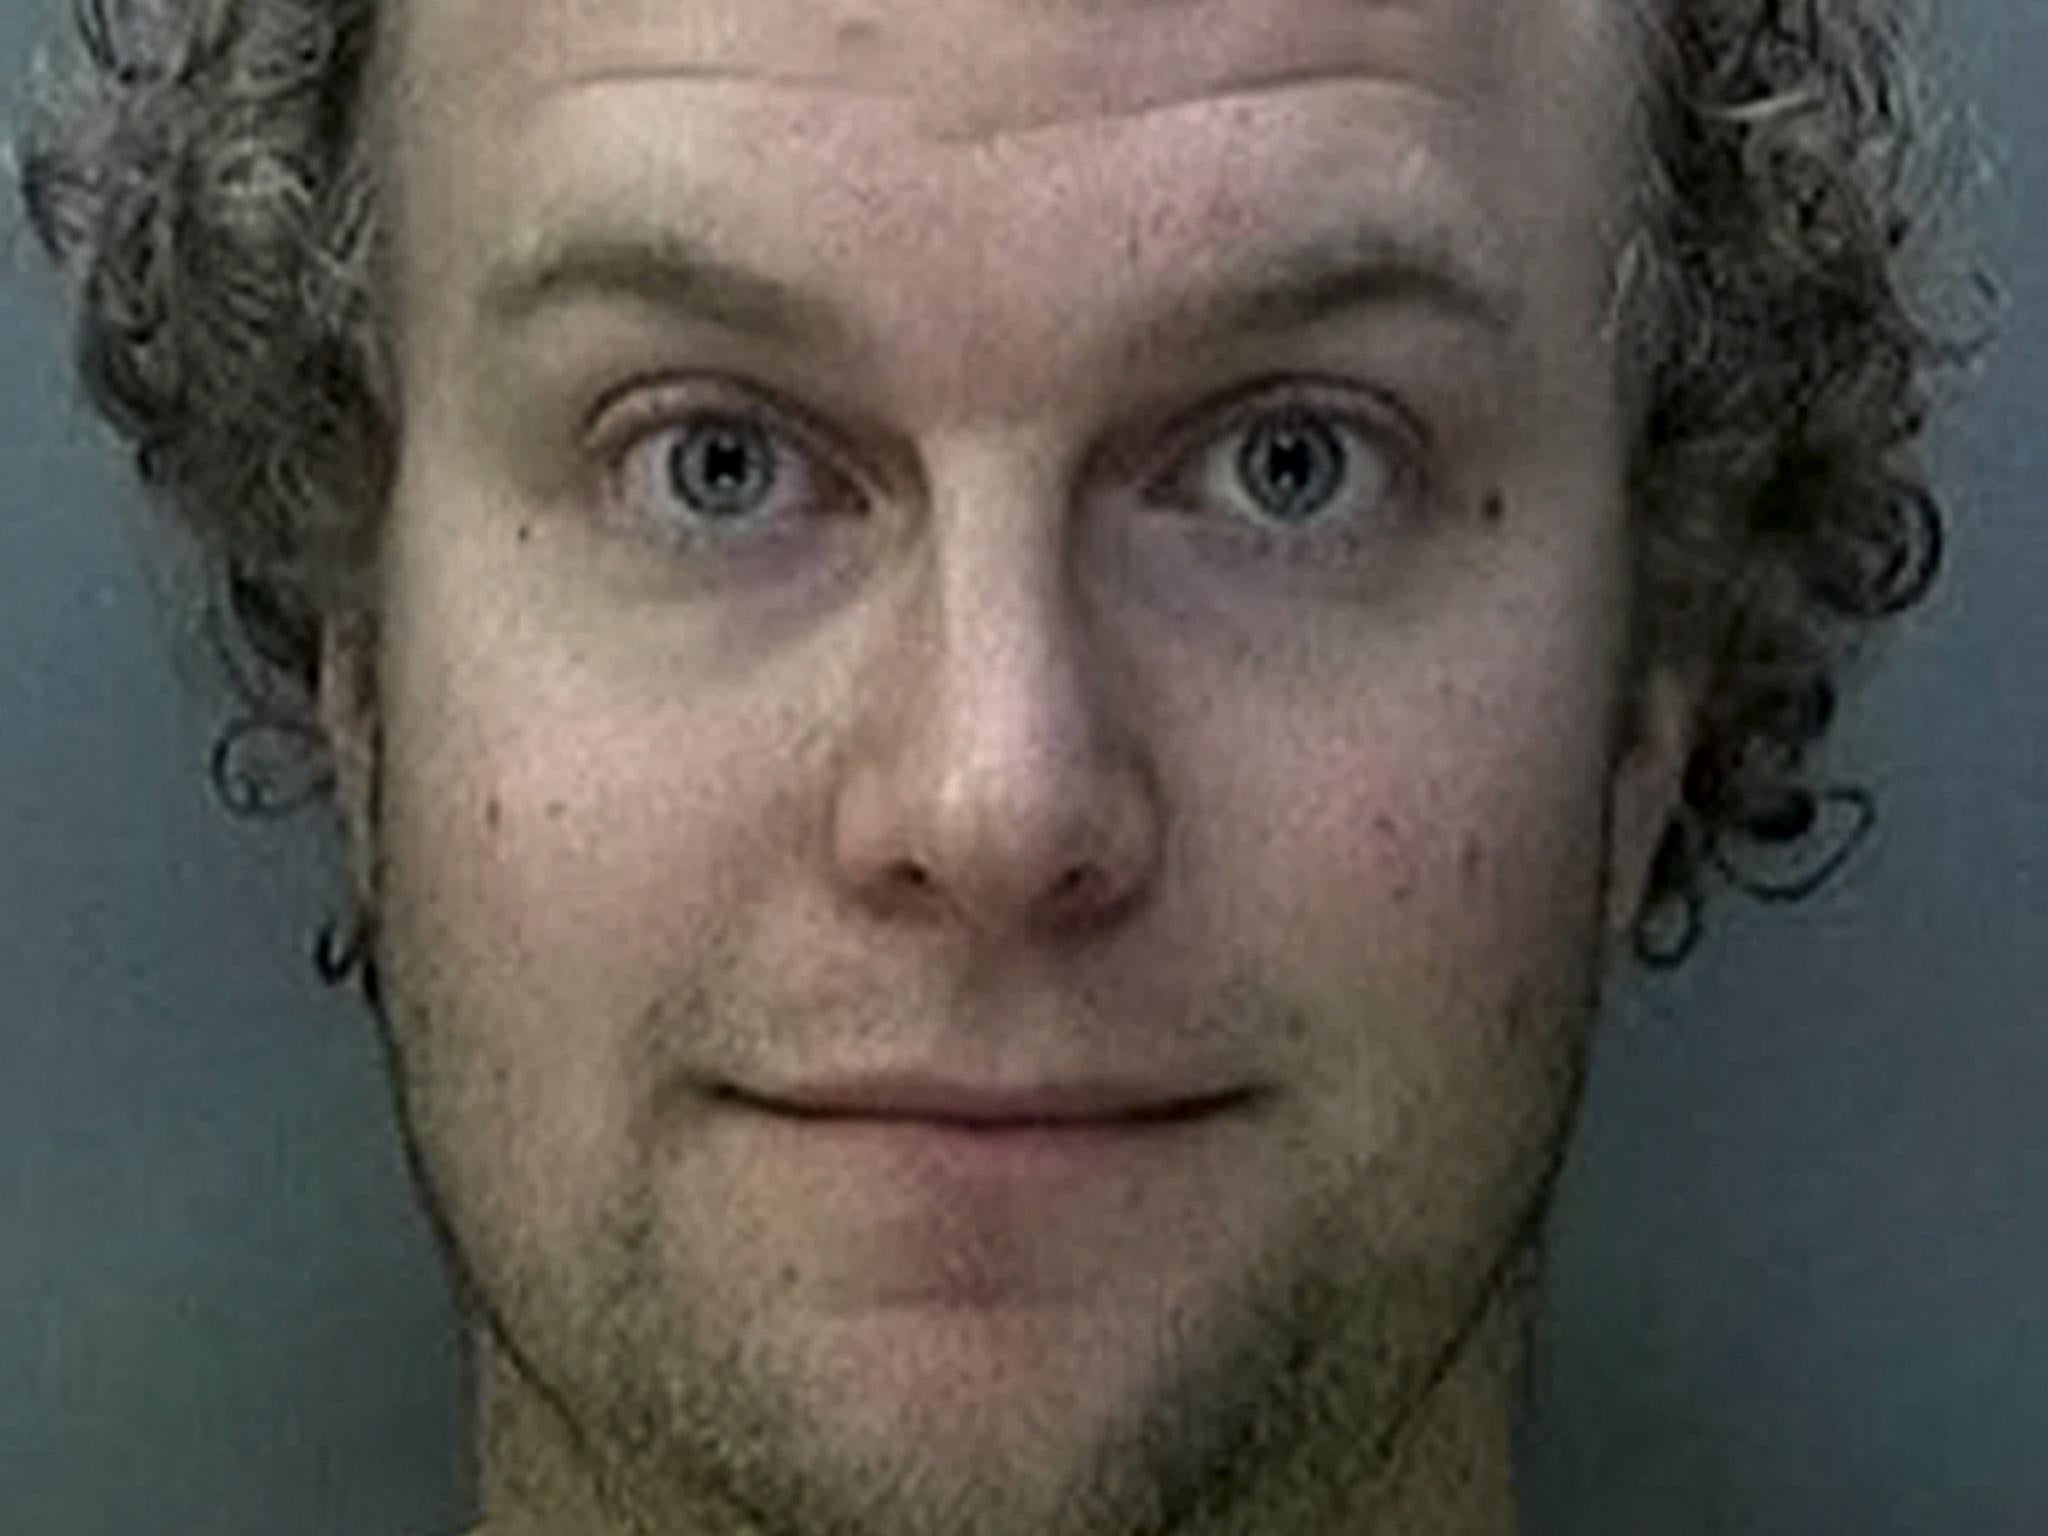 Matthew Falder was jailed for 32 years after blackmailing children on the dark web